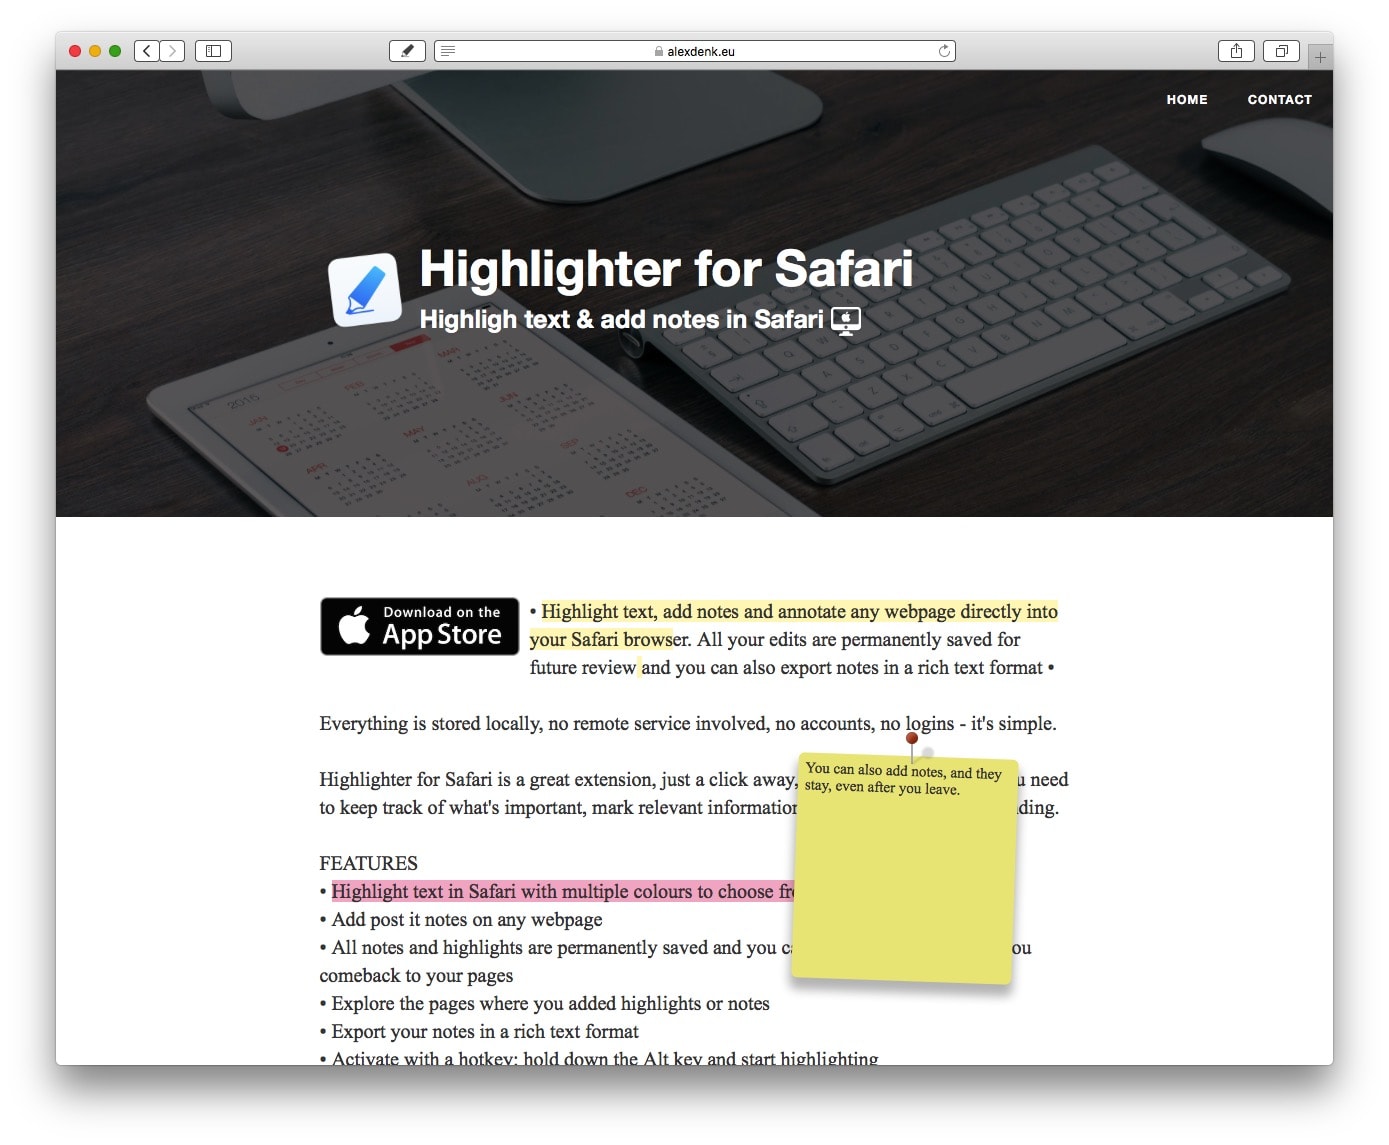 With Highlighter for Safari, highlighting a web page is easy and effective. 